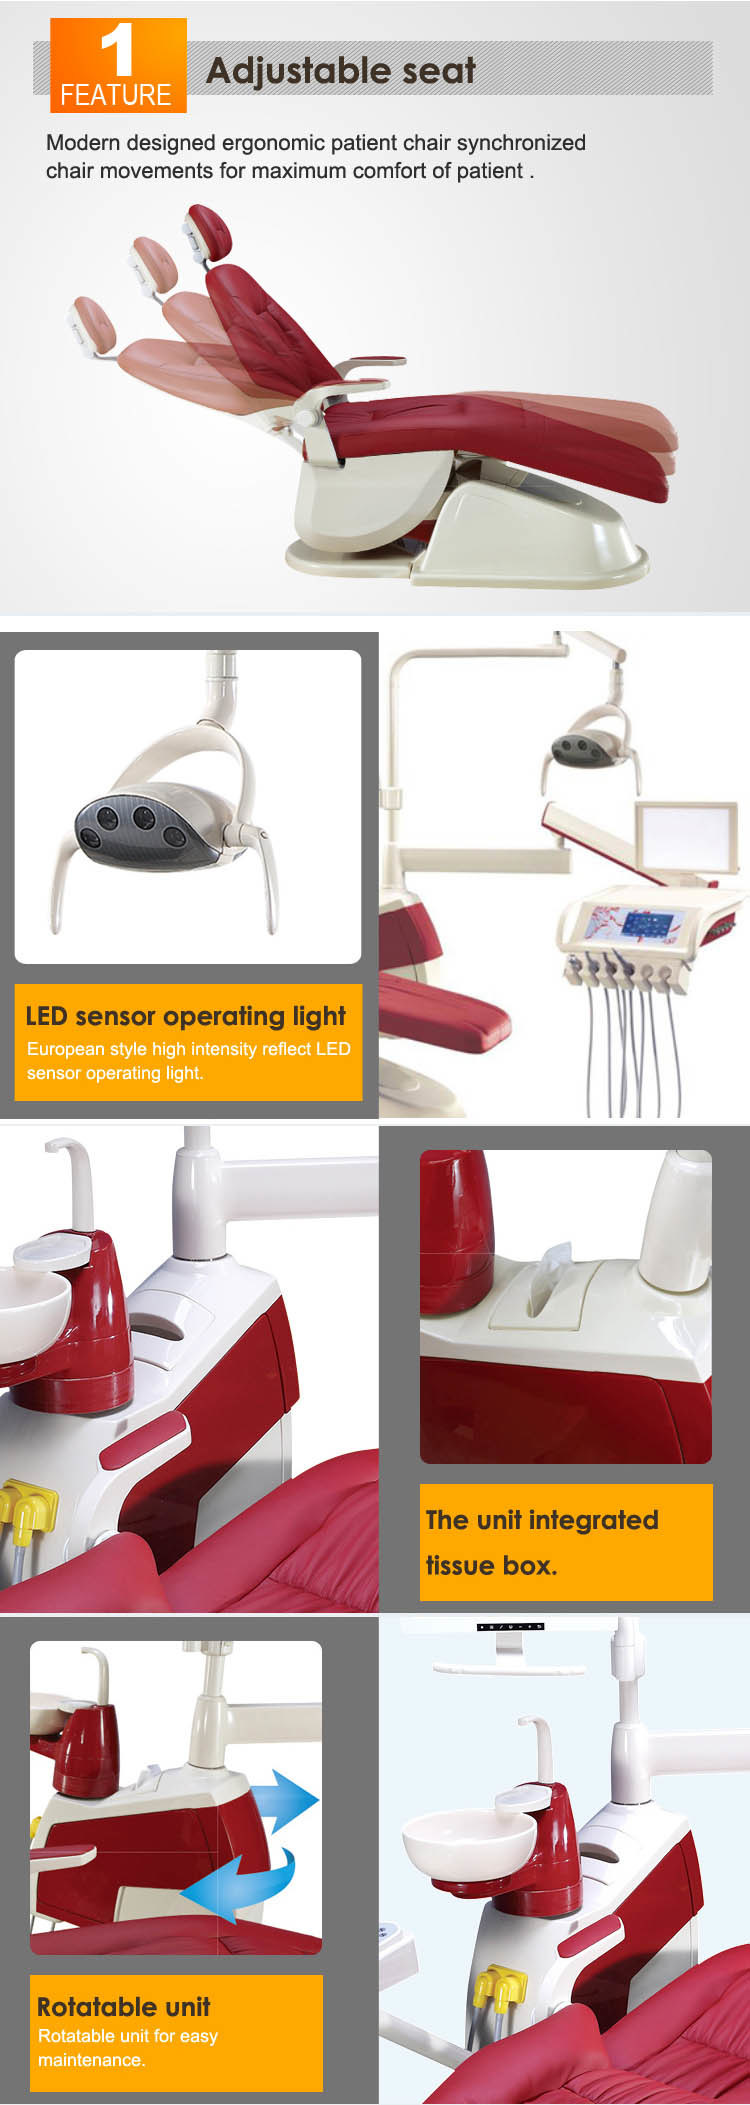 Hot Sale Ce Approved Dental Chair Dental Chair Covers/Dental Chair Online/Dental Equipment Manufacturers